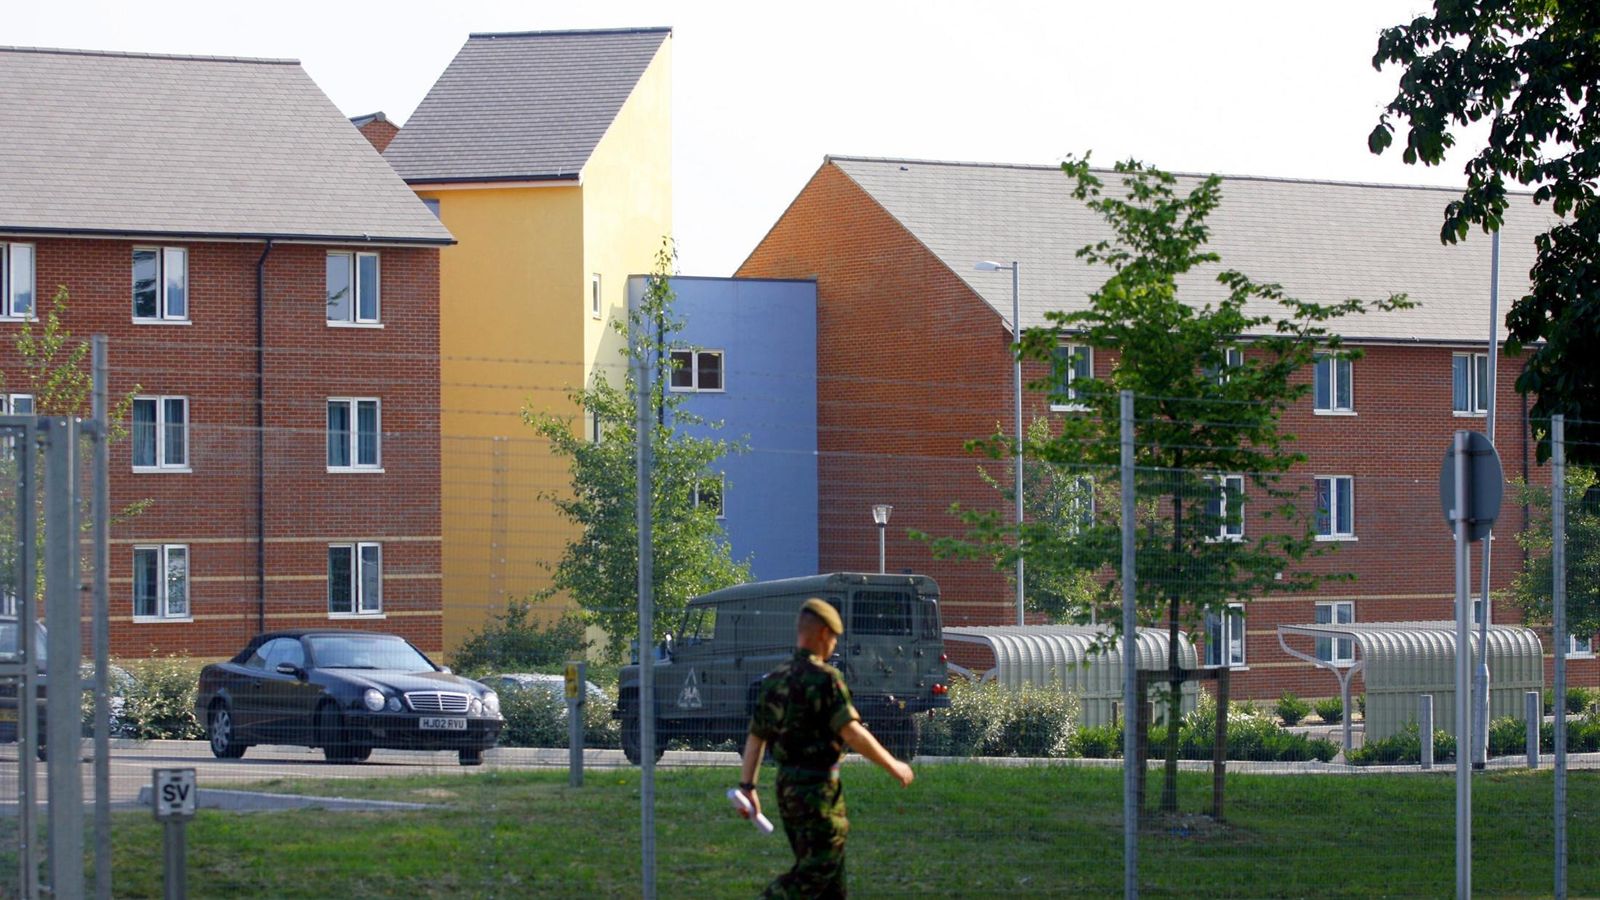 New military housing plans paused after backlash